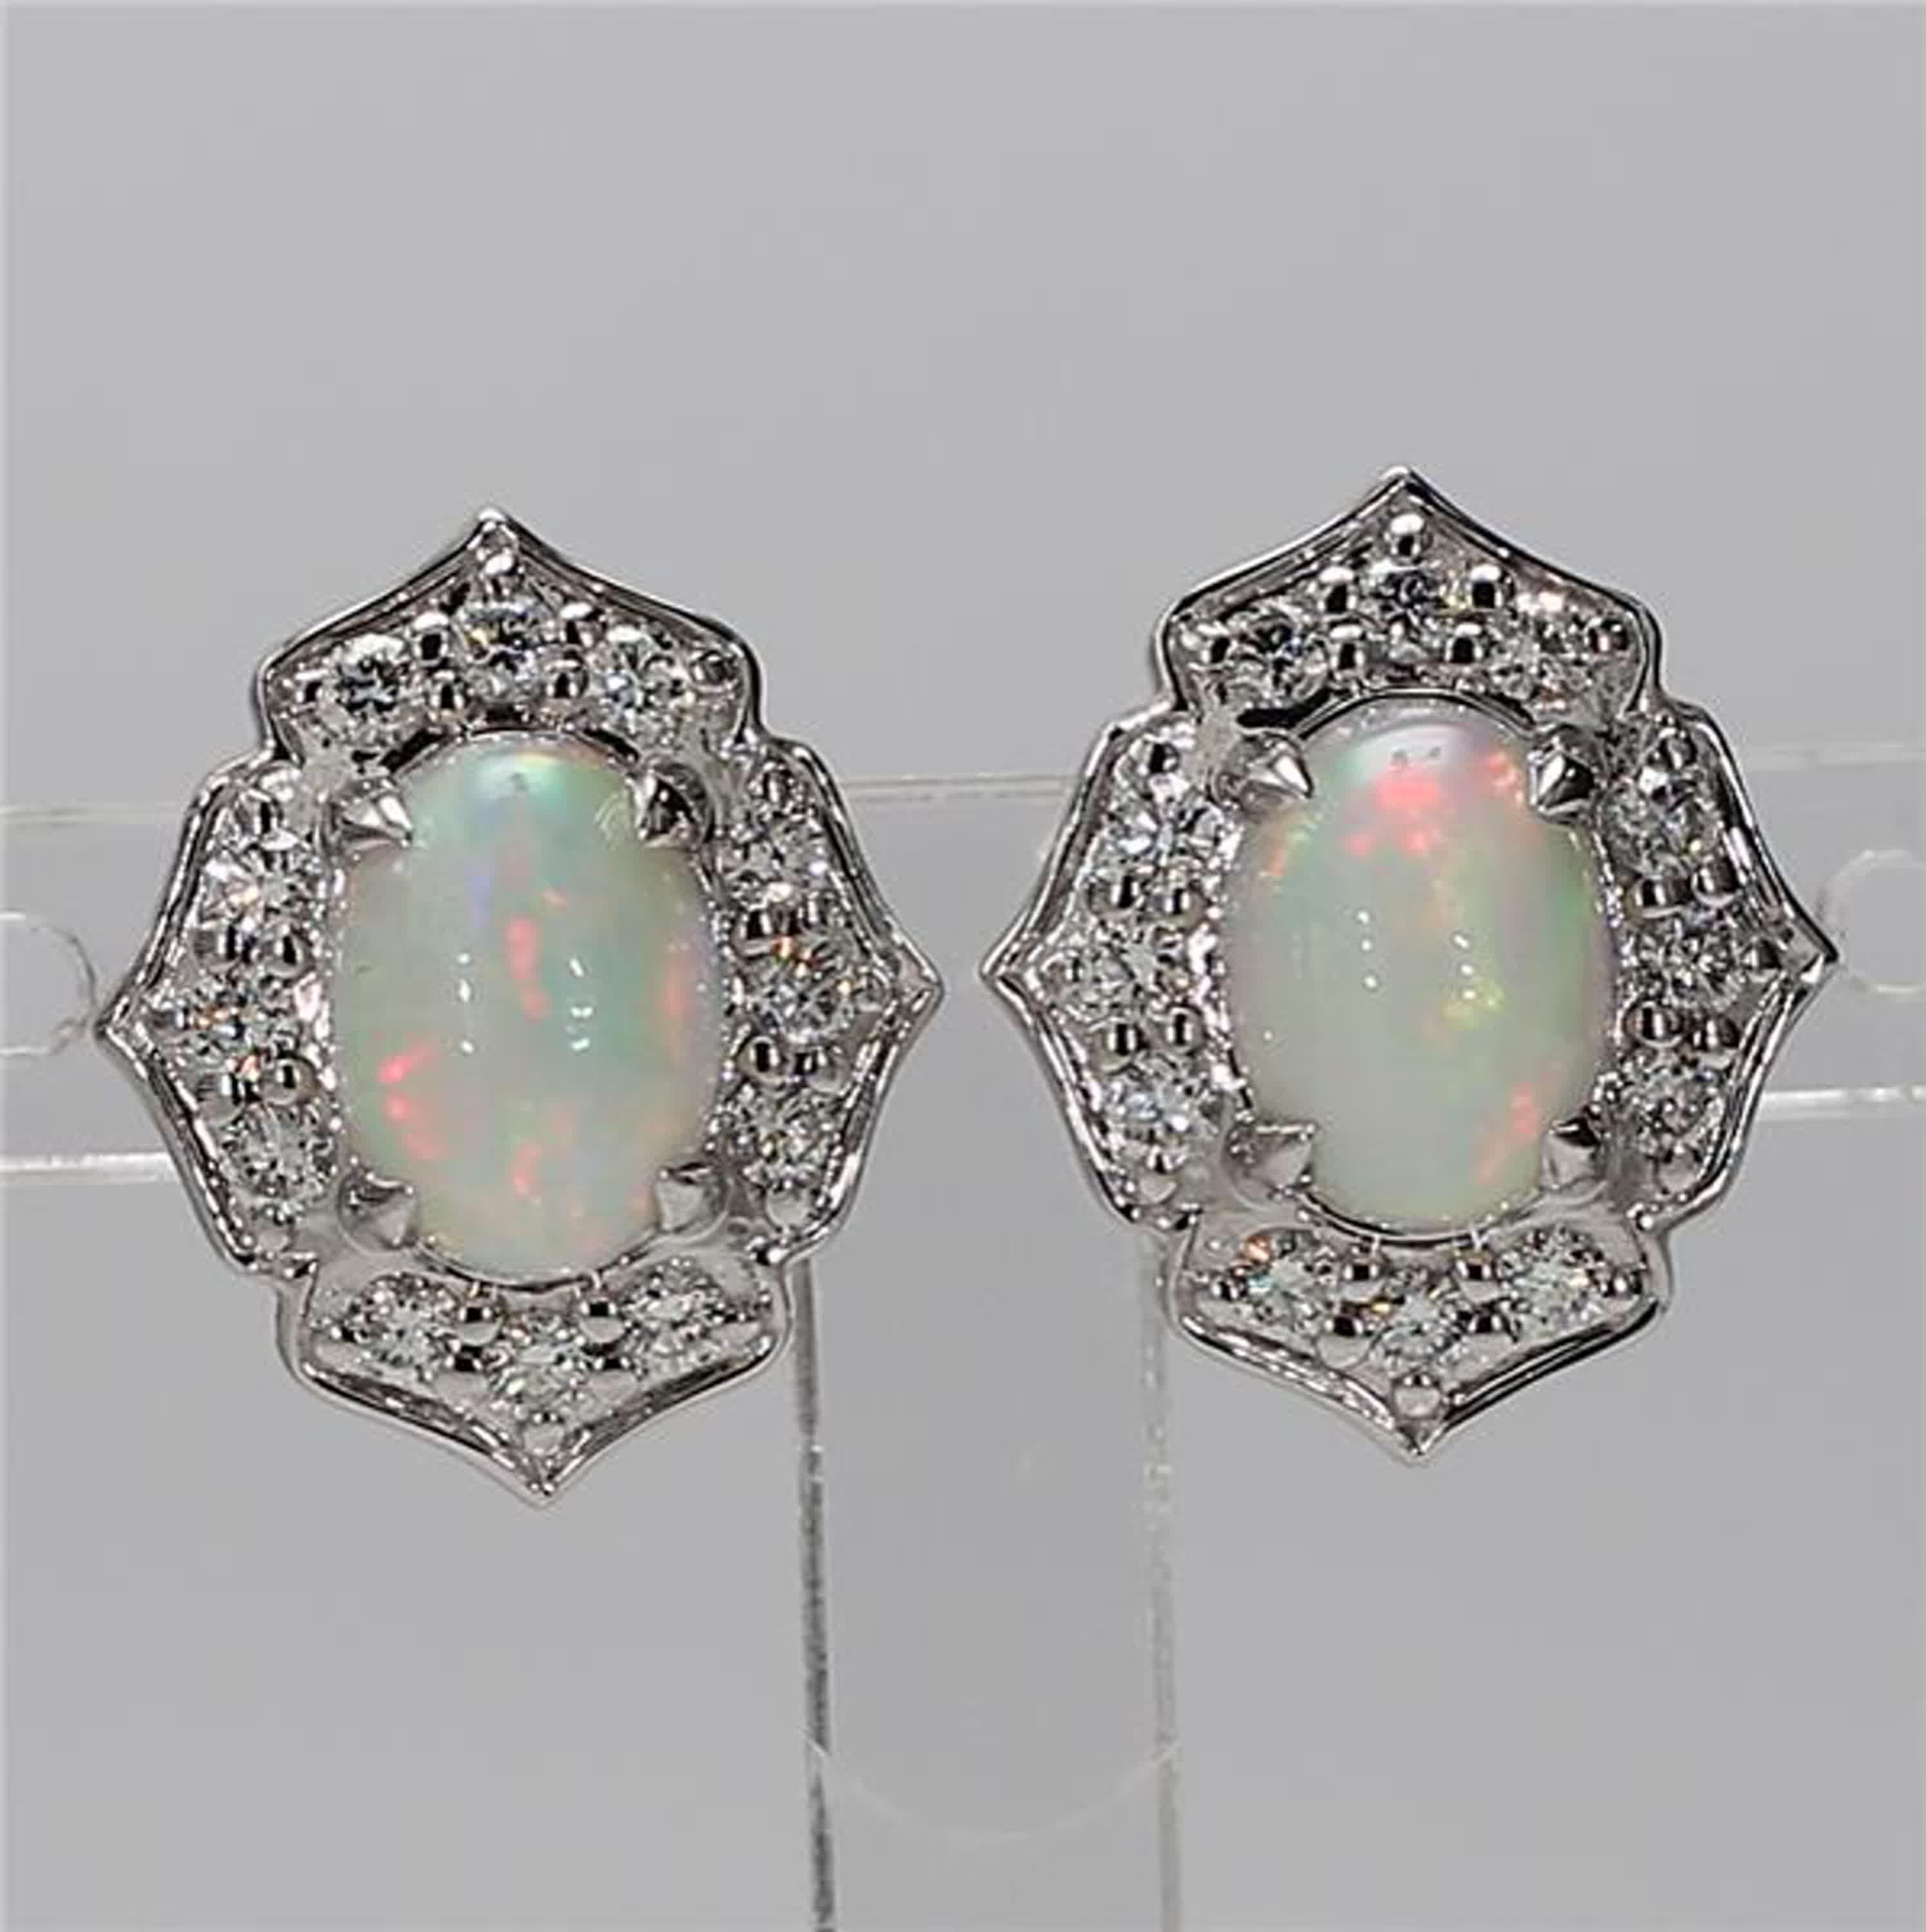 RareGemWorld's classic opal earrings. Mounted in a beautiful 18K White Gold setting with natural oval cut opal's. The opal's are surrounded by natural round white diamond melee. These earrings are guaranteed to impress and enhance your personal